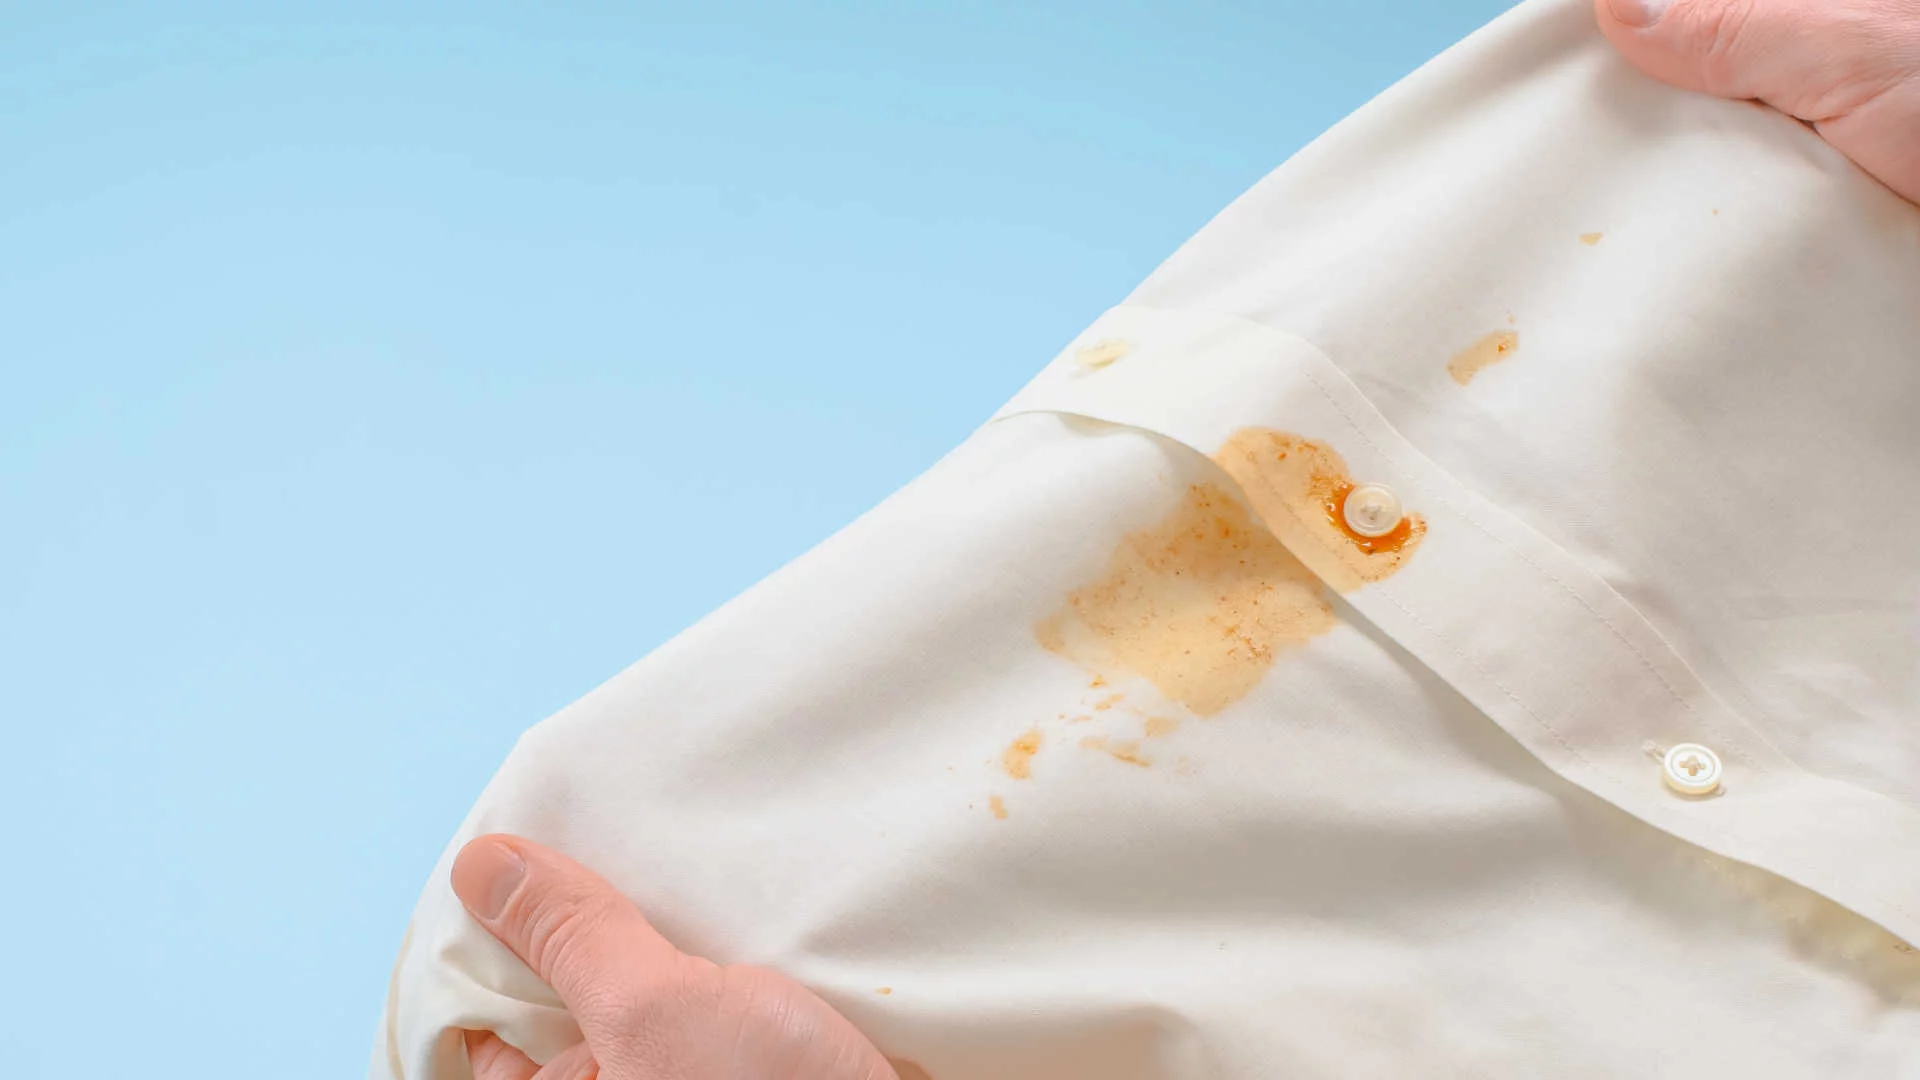 How to Remove Grease Stains from Clothes